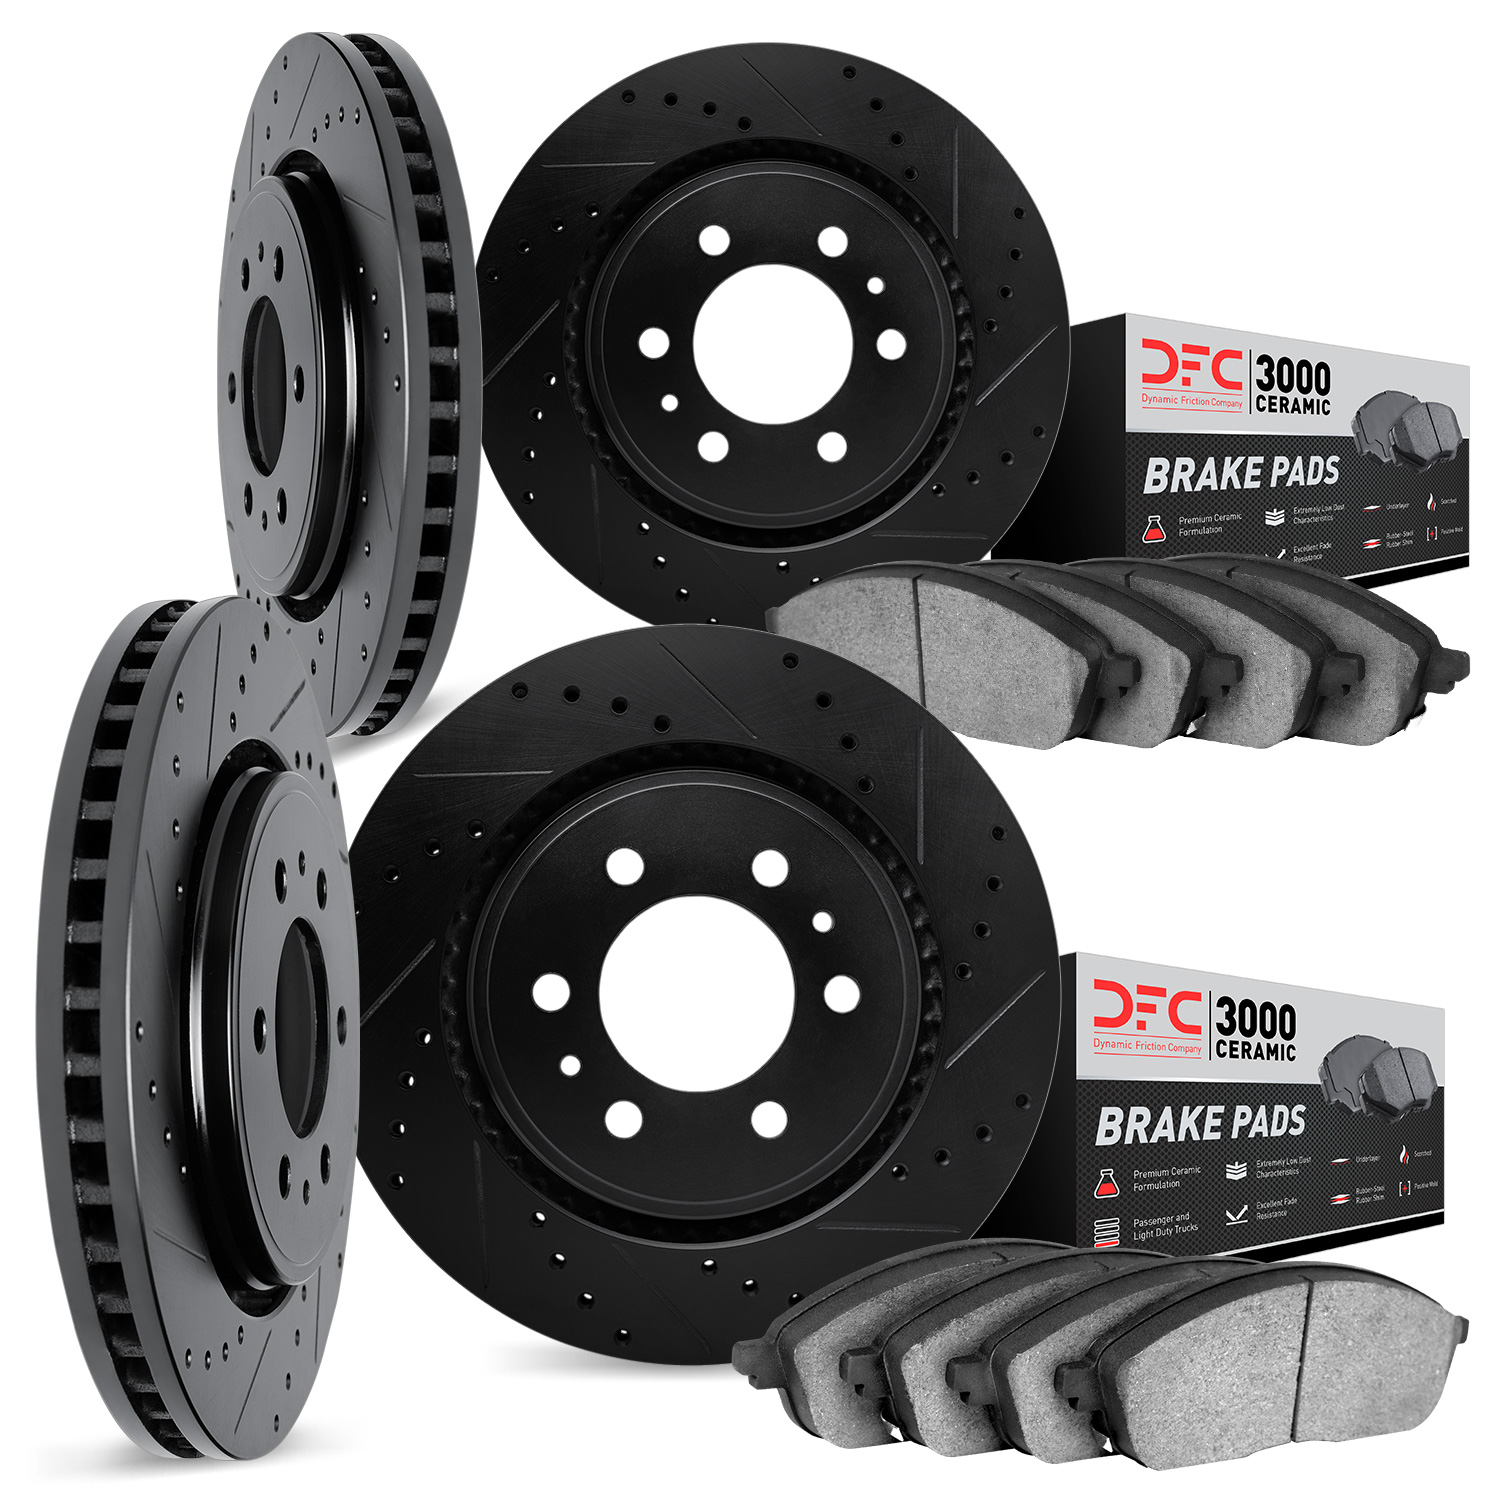 8304-46033 Drilled/Slotted Brake Rotors with 3000-Series Ceramic Brake Pads Kit [Black], 2004-2009 GM, Position: Front and Rear